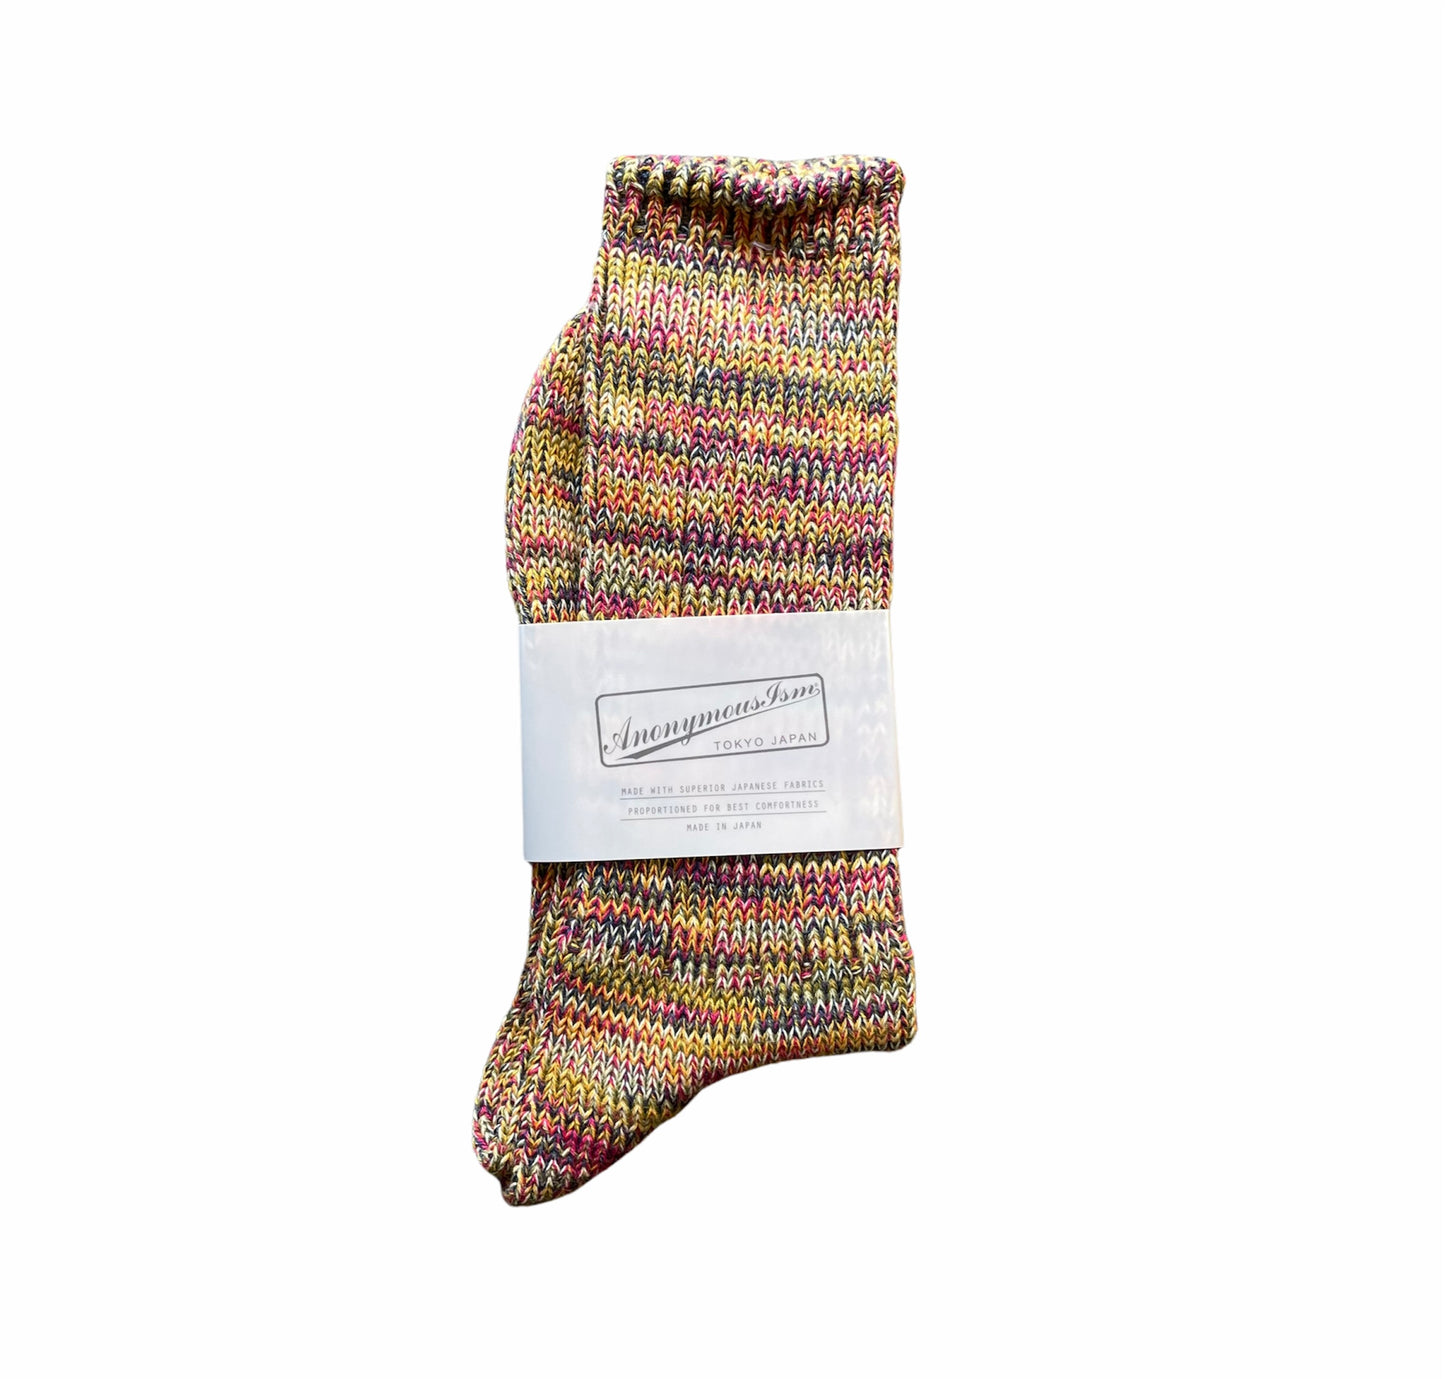 ANONYMOUS ISM - 5 Color Crew Mix Socks